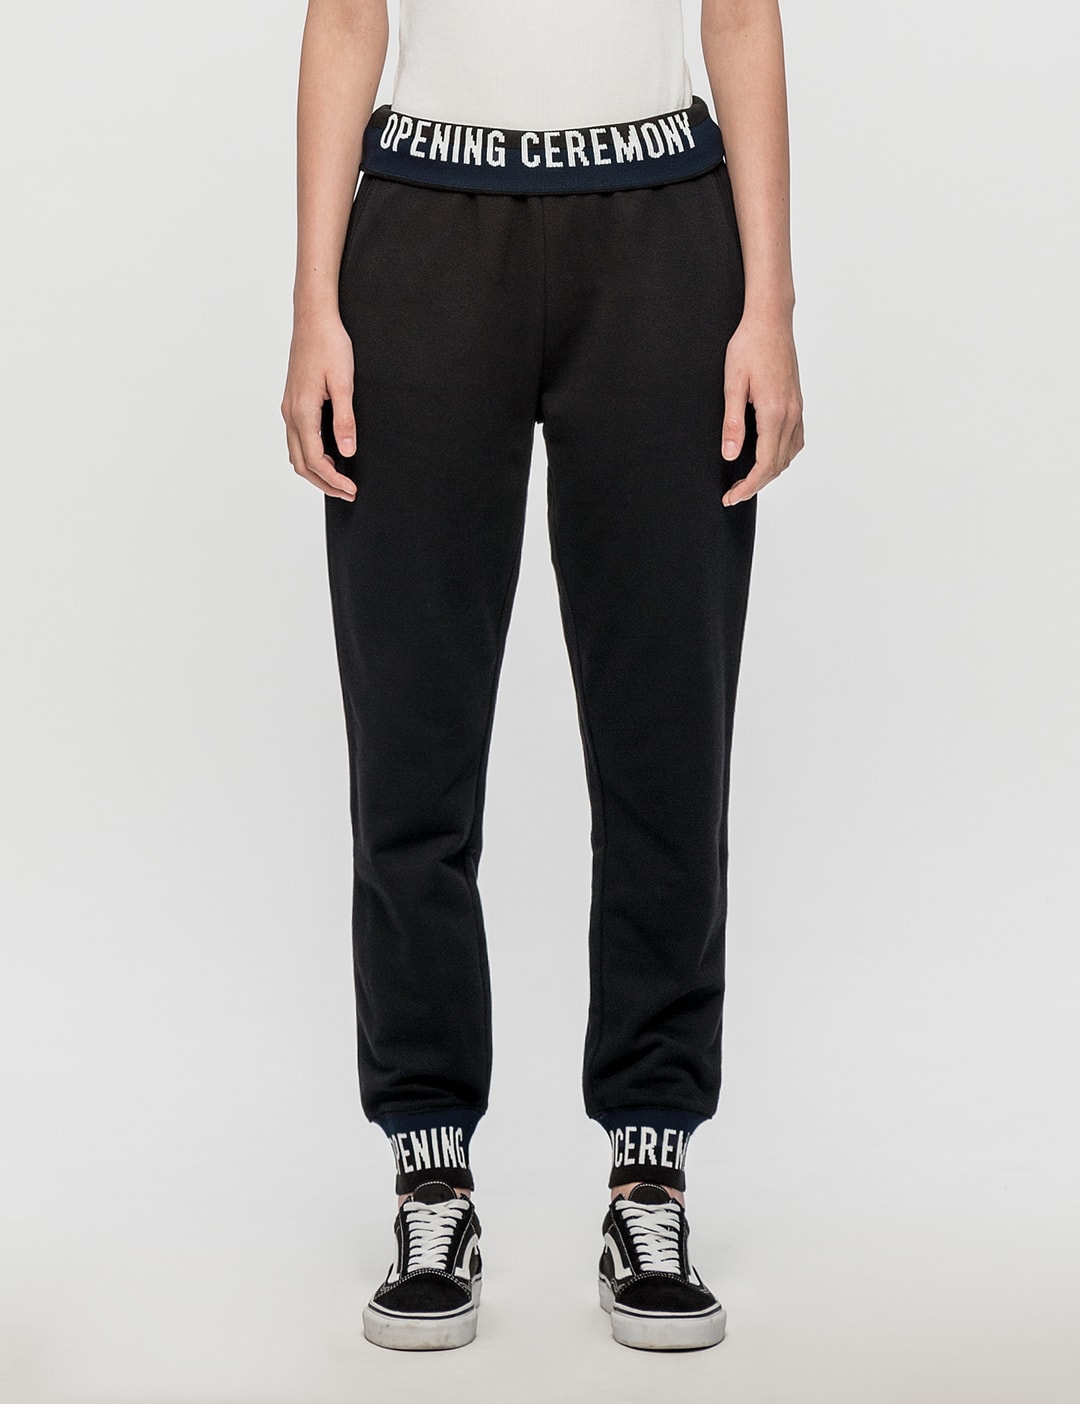 Opening Ceremony - Elastic Logo Sweatpants | HBX - Globally Curated ...